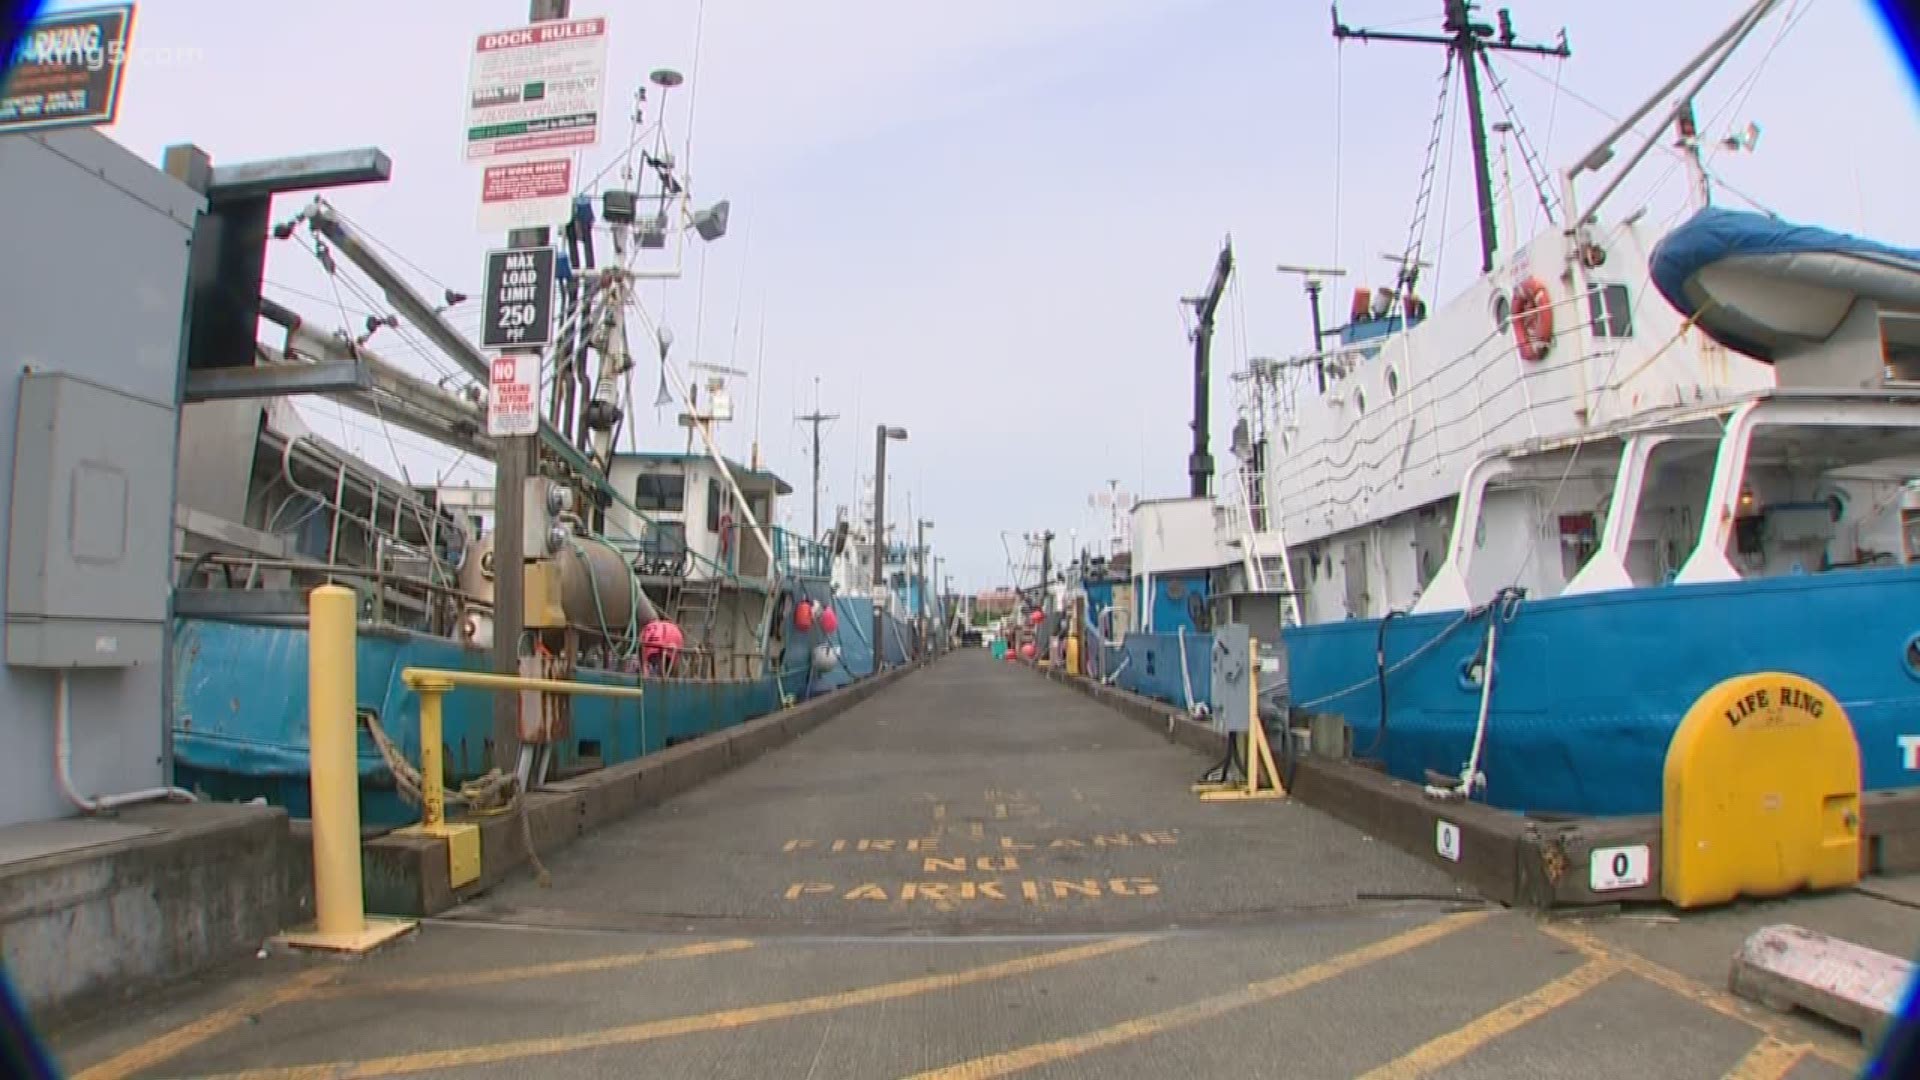 The trade war could have a big impact on our fishing industry. Glenn Farley joins us from Fisherman's Terminal to explain what's at stake.